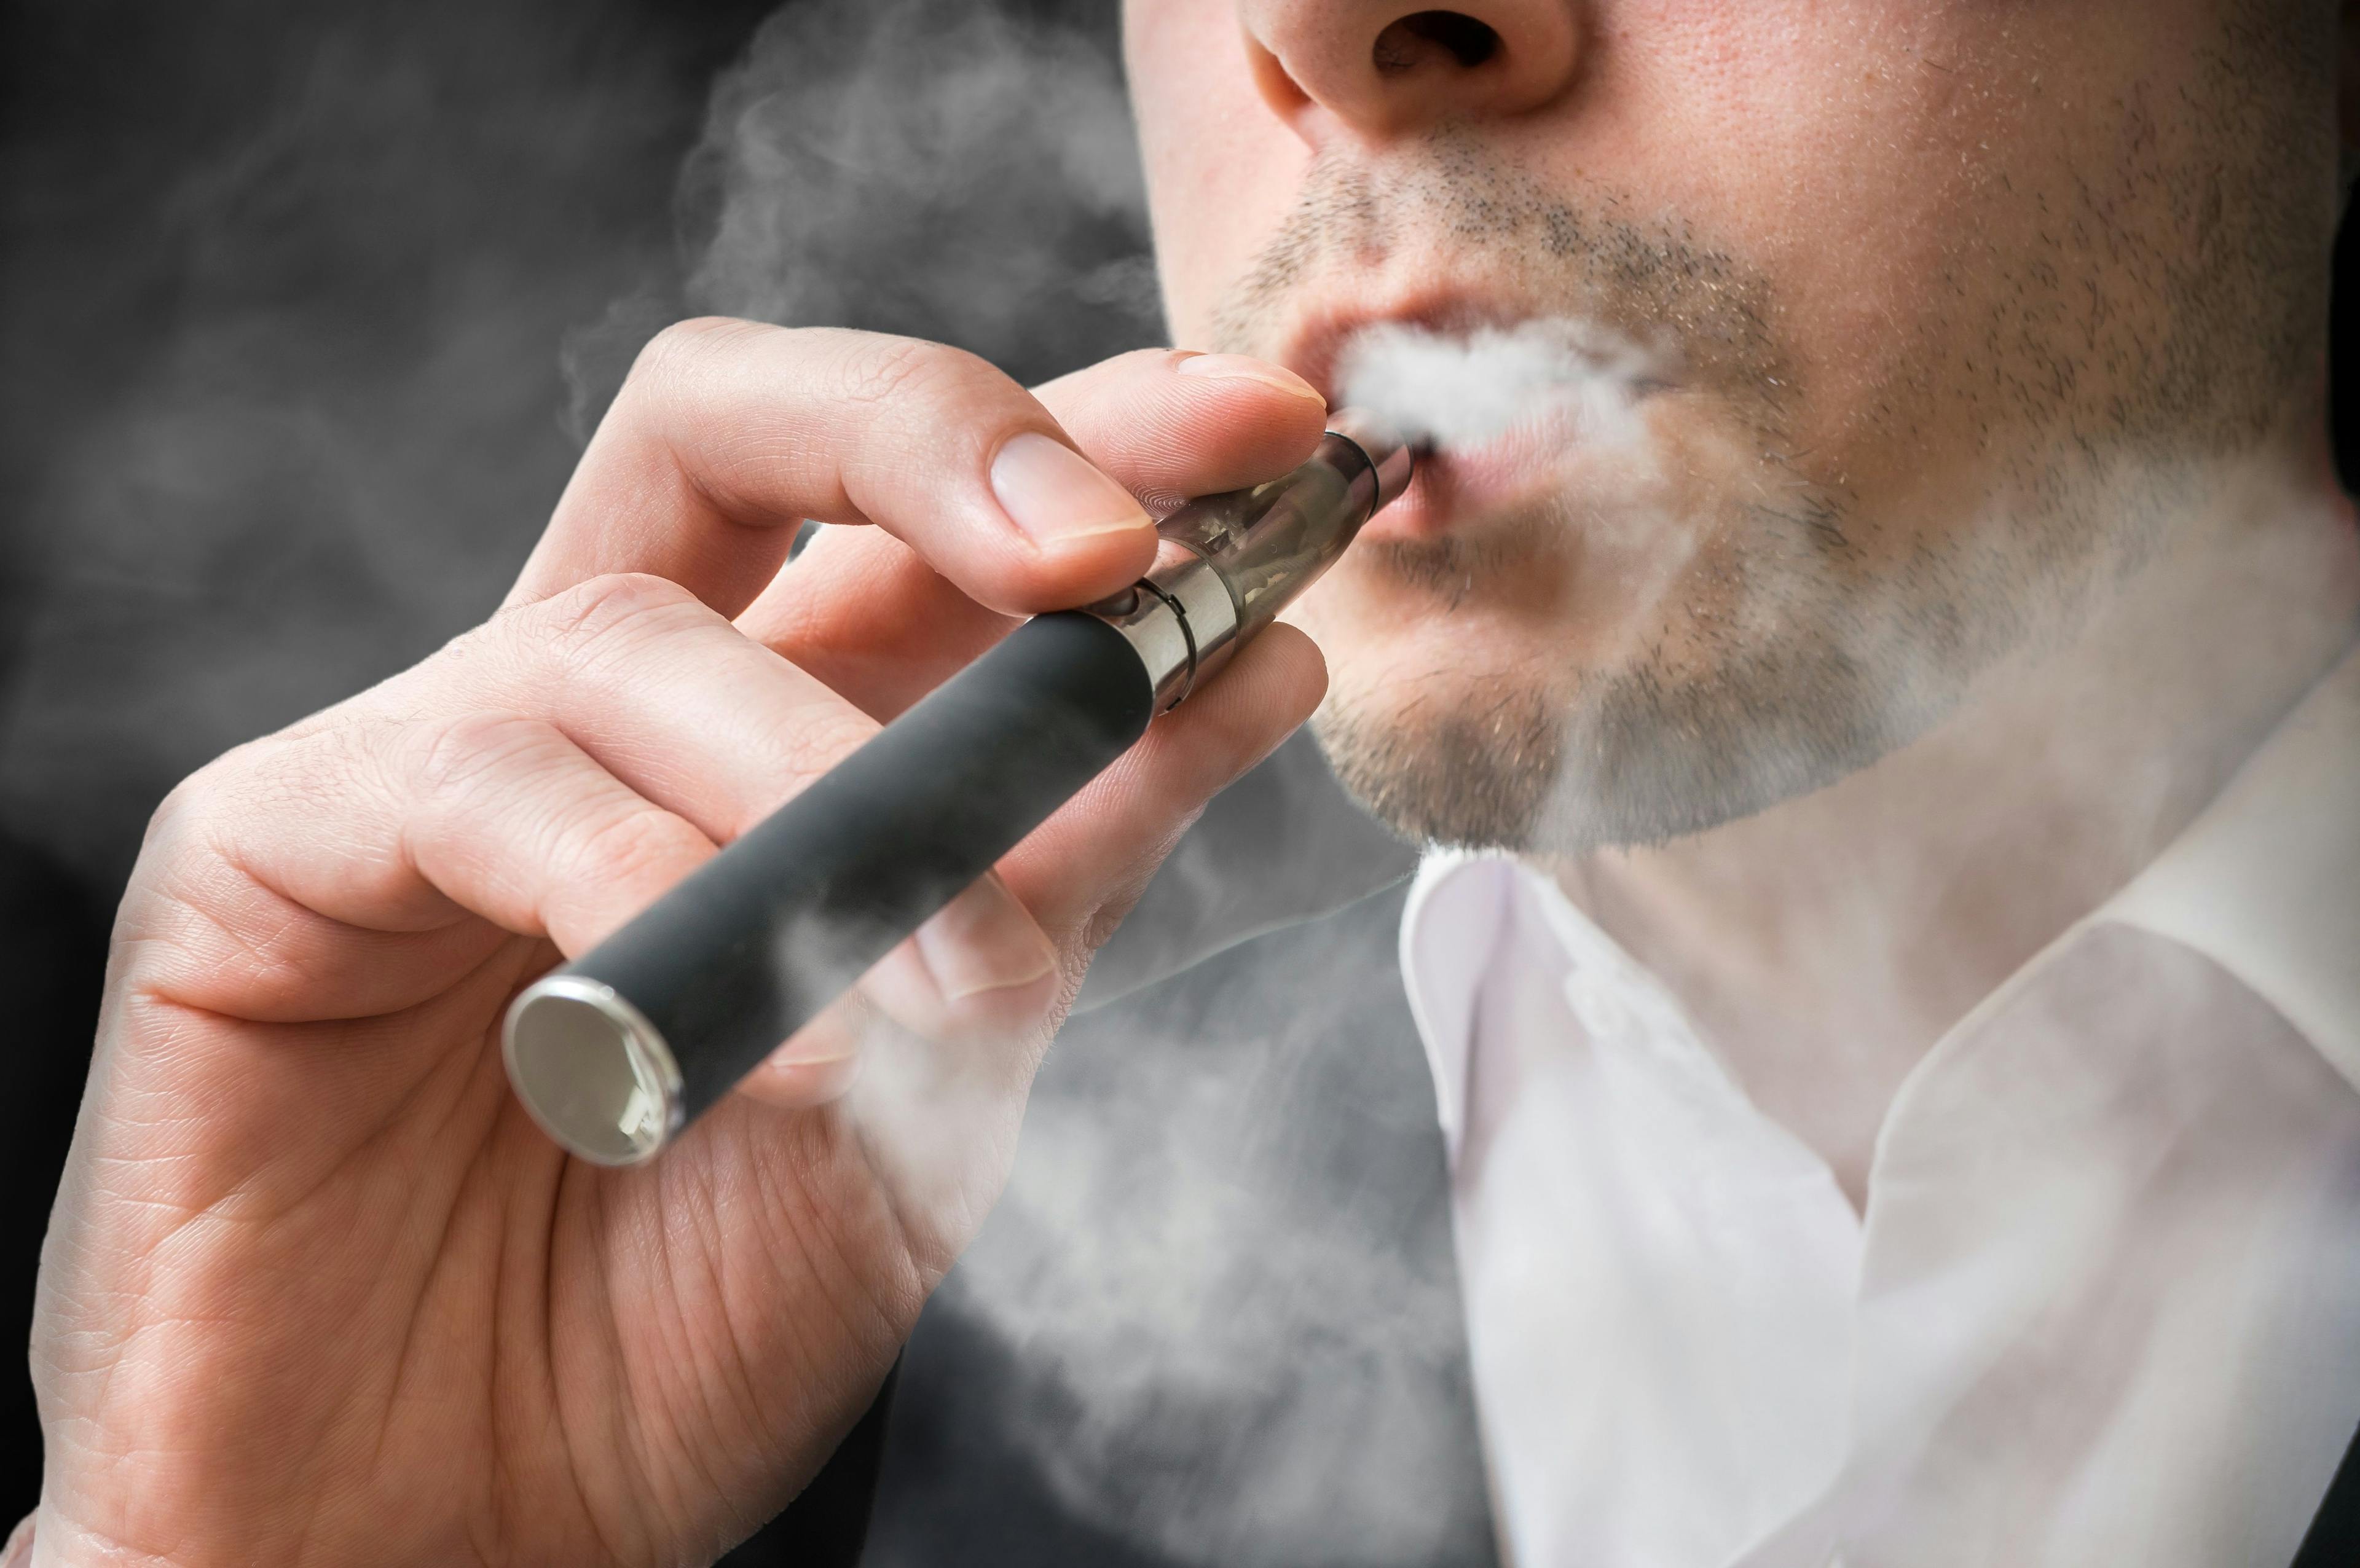 E-Cigarette Use Increases Odds of Prediabetes, Study Results Show